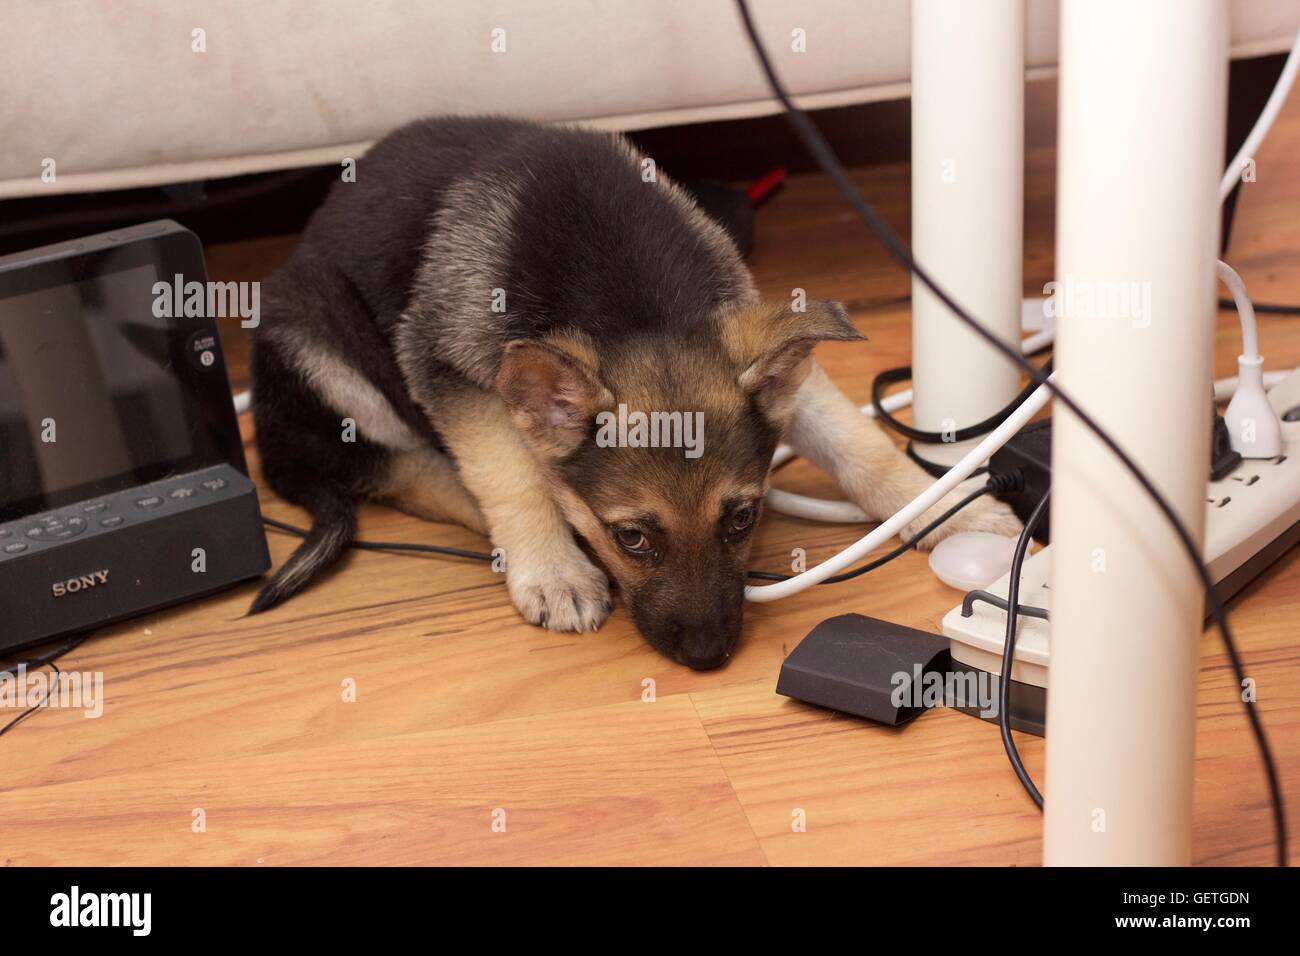 Puppy caught chewing cords Stock Photo